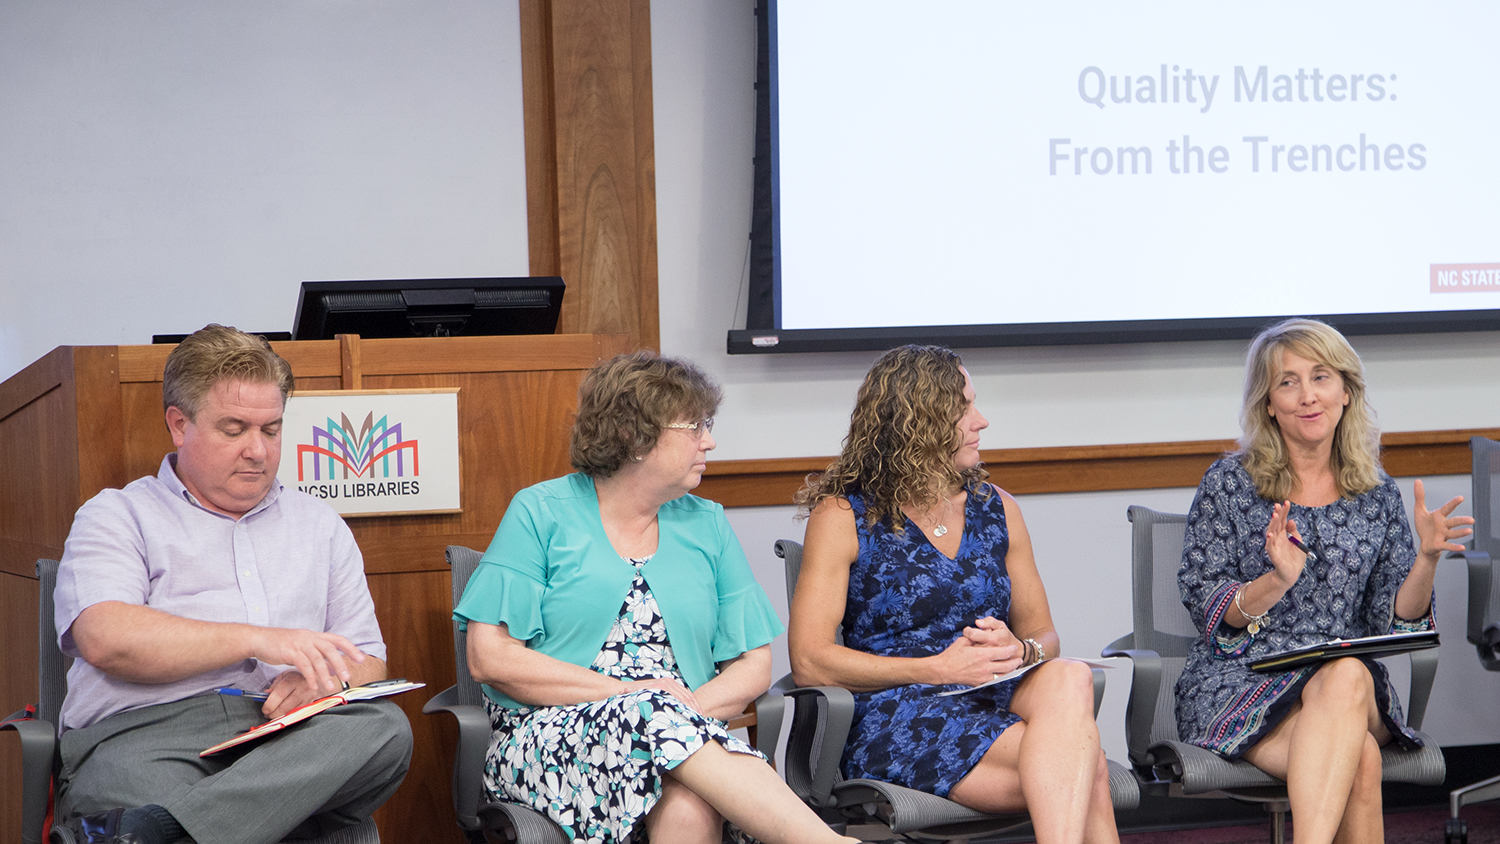 Members of the first cohort of the Online Course Improvement Program facilitated a panel discussion at Summer Shorts 2018. Pictured left to right: Paul Mulvey, Cheryl Block, Amanda Edwards and Tracy Appling. Not pictured: Marne Coit, Ana Gray and Jill Grifenhagen. The group sits in front of the audience. Tracy Appling is speaking and the other OCIP members are looking at her.